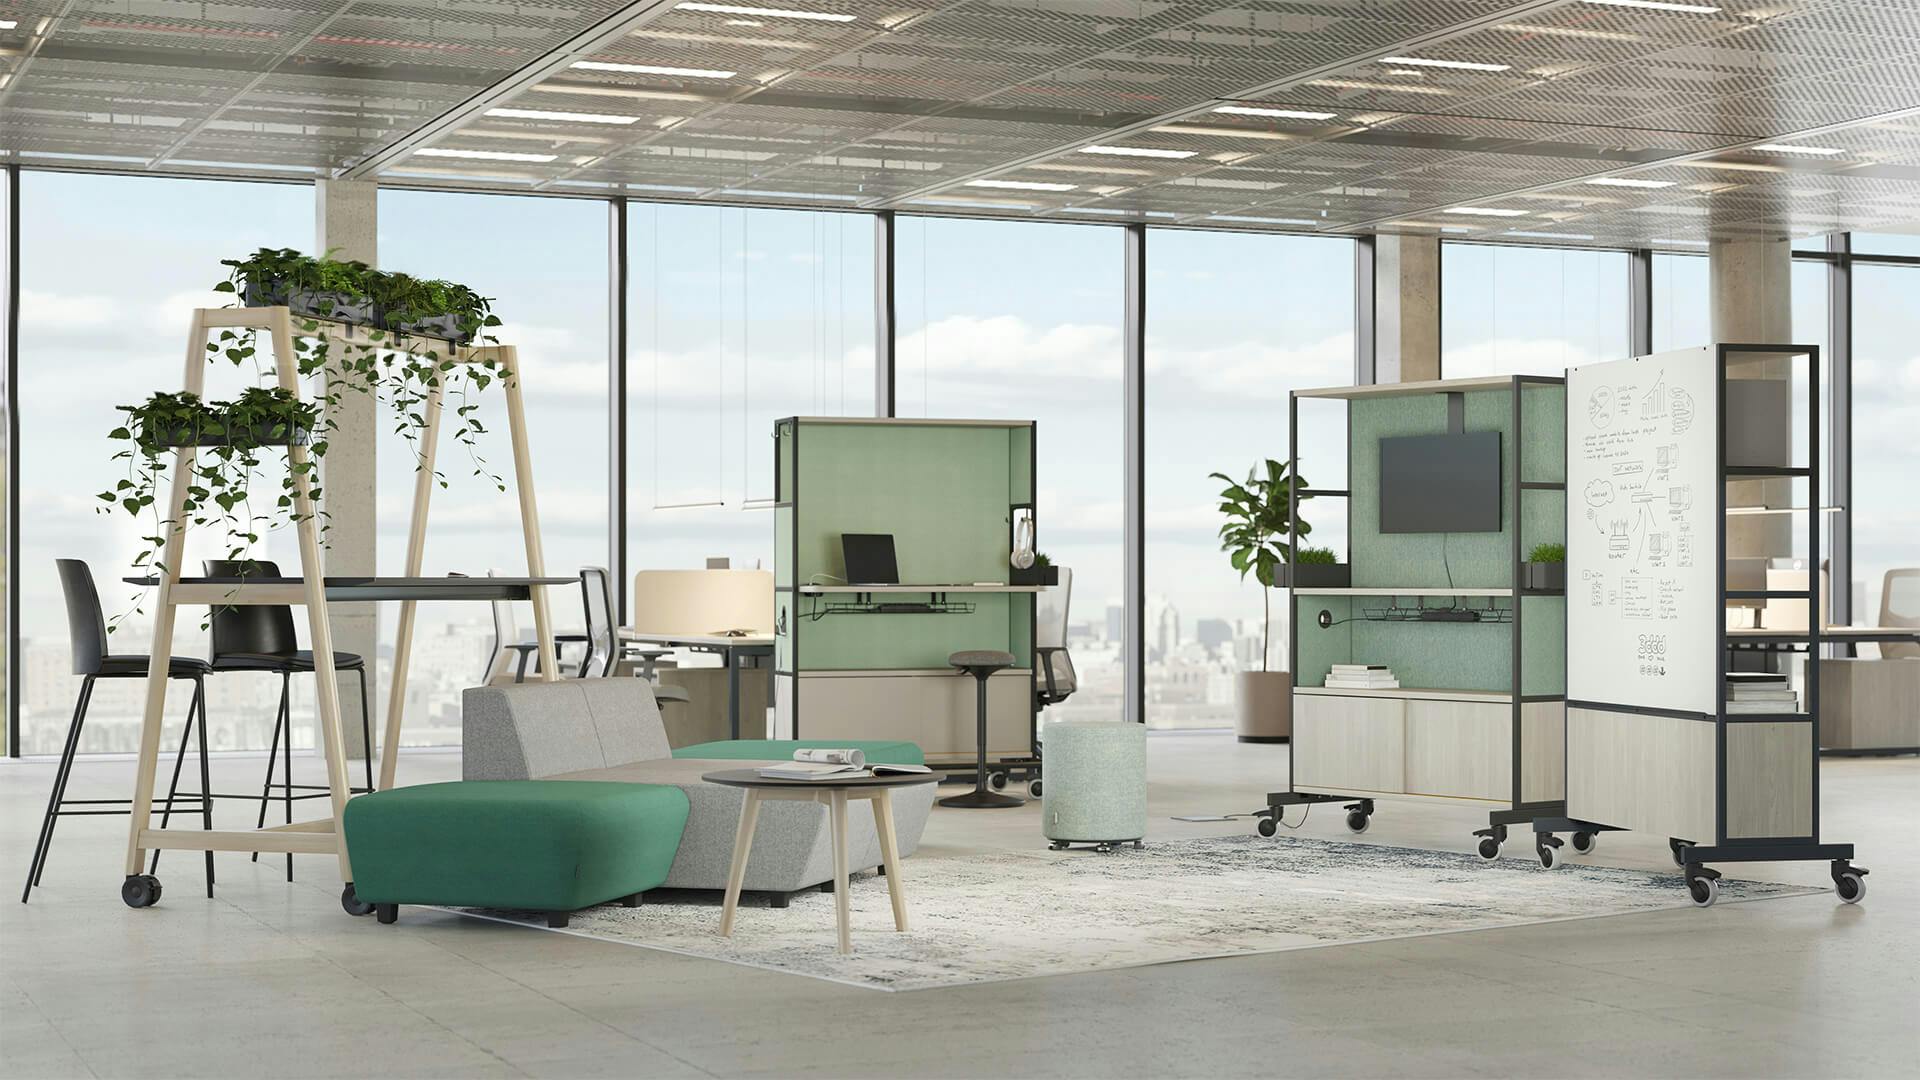 A new generation of work spaces